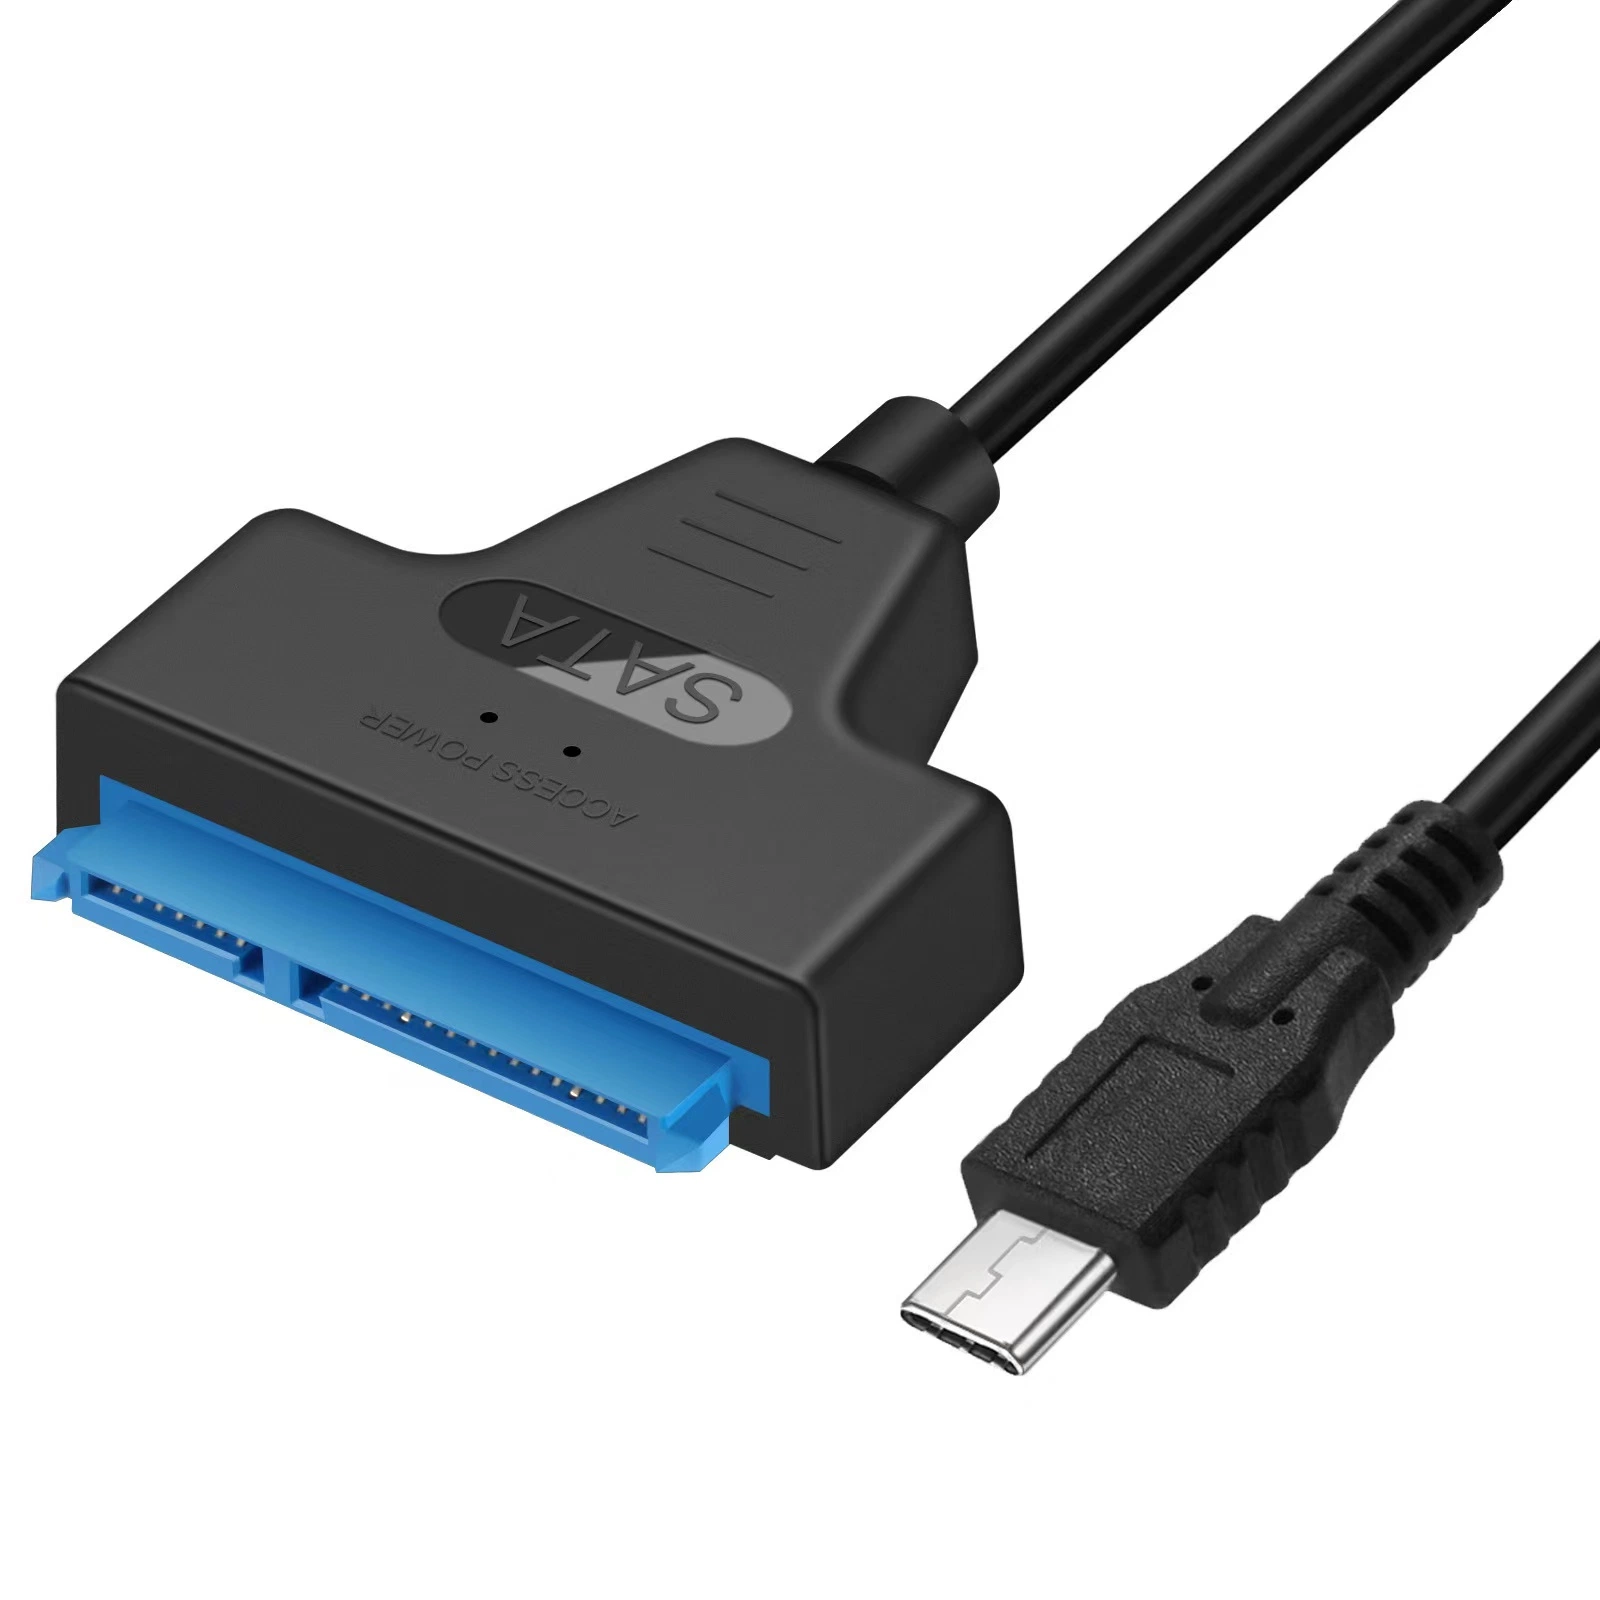 USB 3.0 Type C 2 in 1 to SATA 2.5" Hard Drive Cable